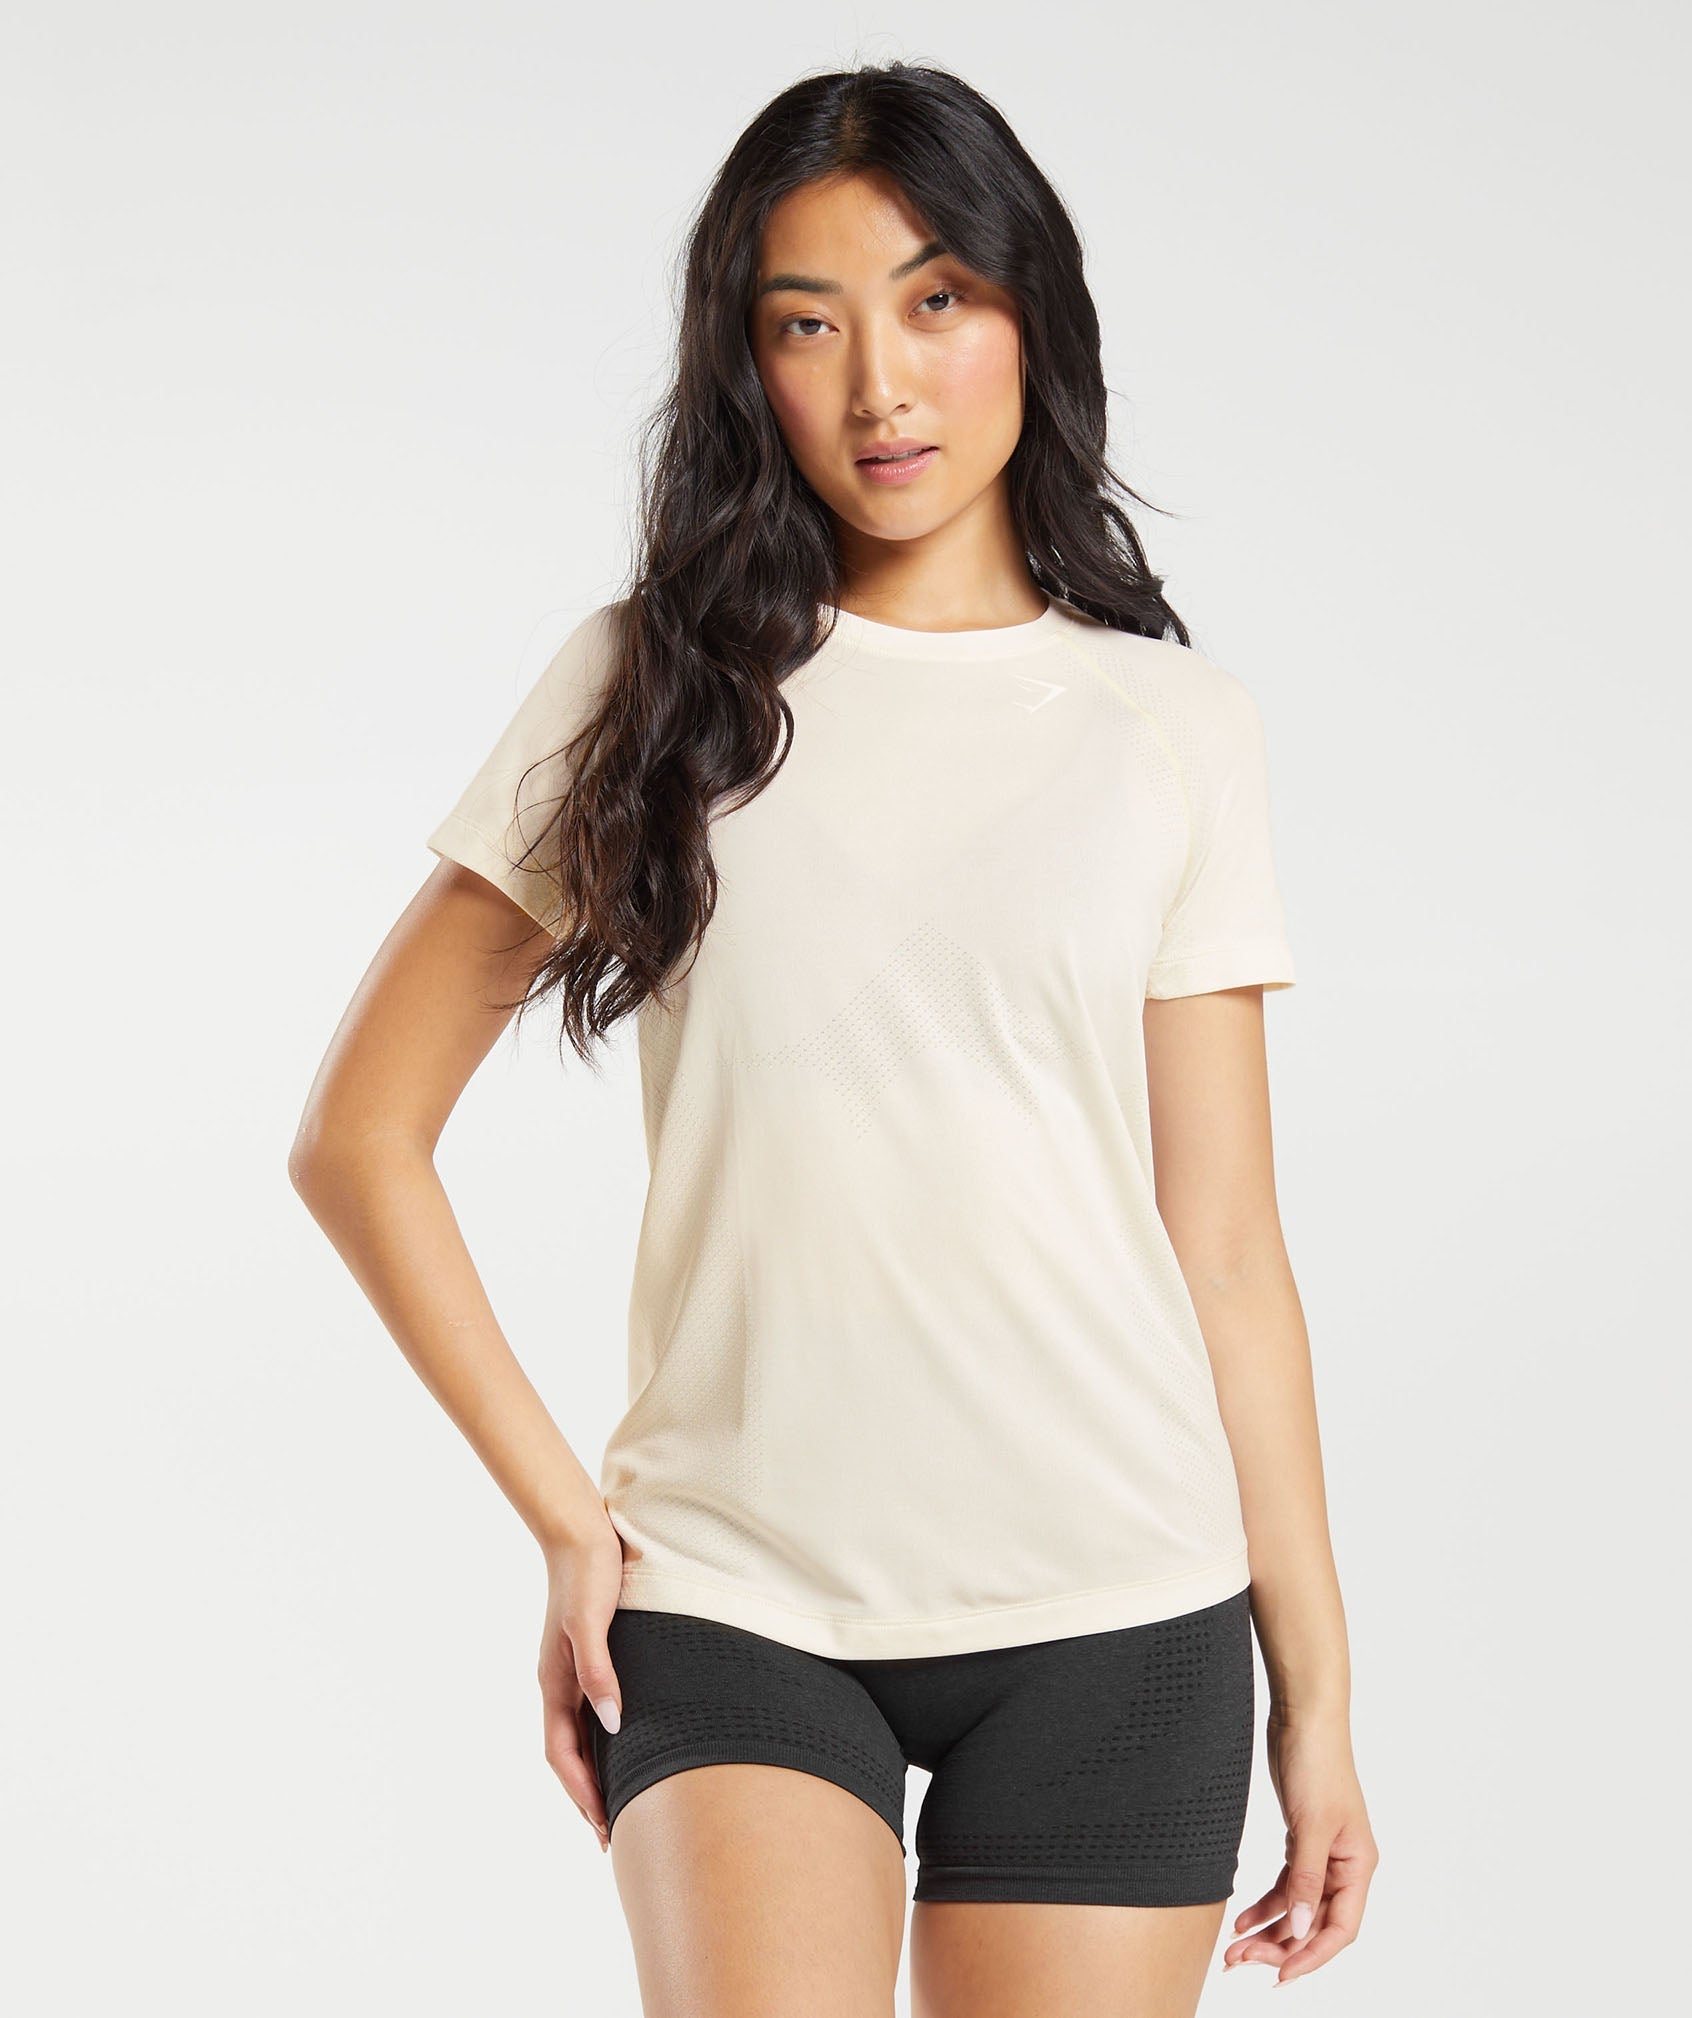 Vital Seamless 2.0 Light T-Shirt in Coconut White Marl - view 1